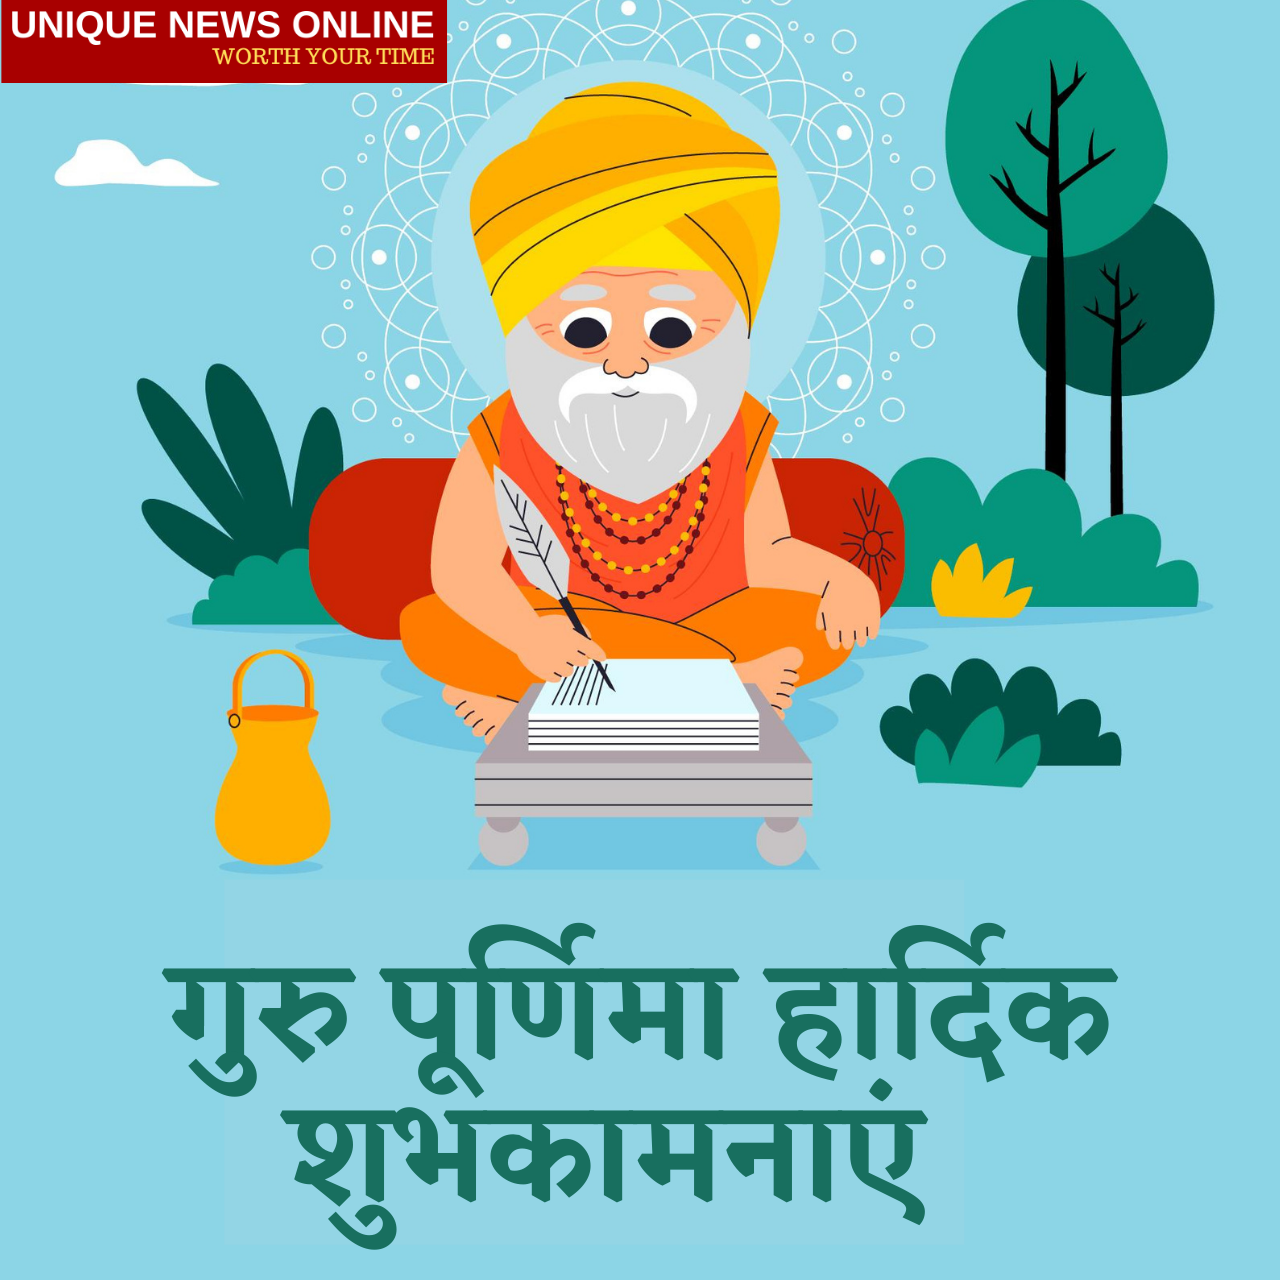 Guru Purnima 2021 Hindi Quotes, HD Images, Wishes, Status, Greetings, and Messages to share